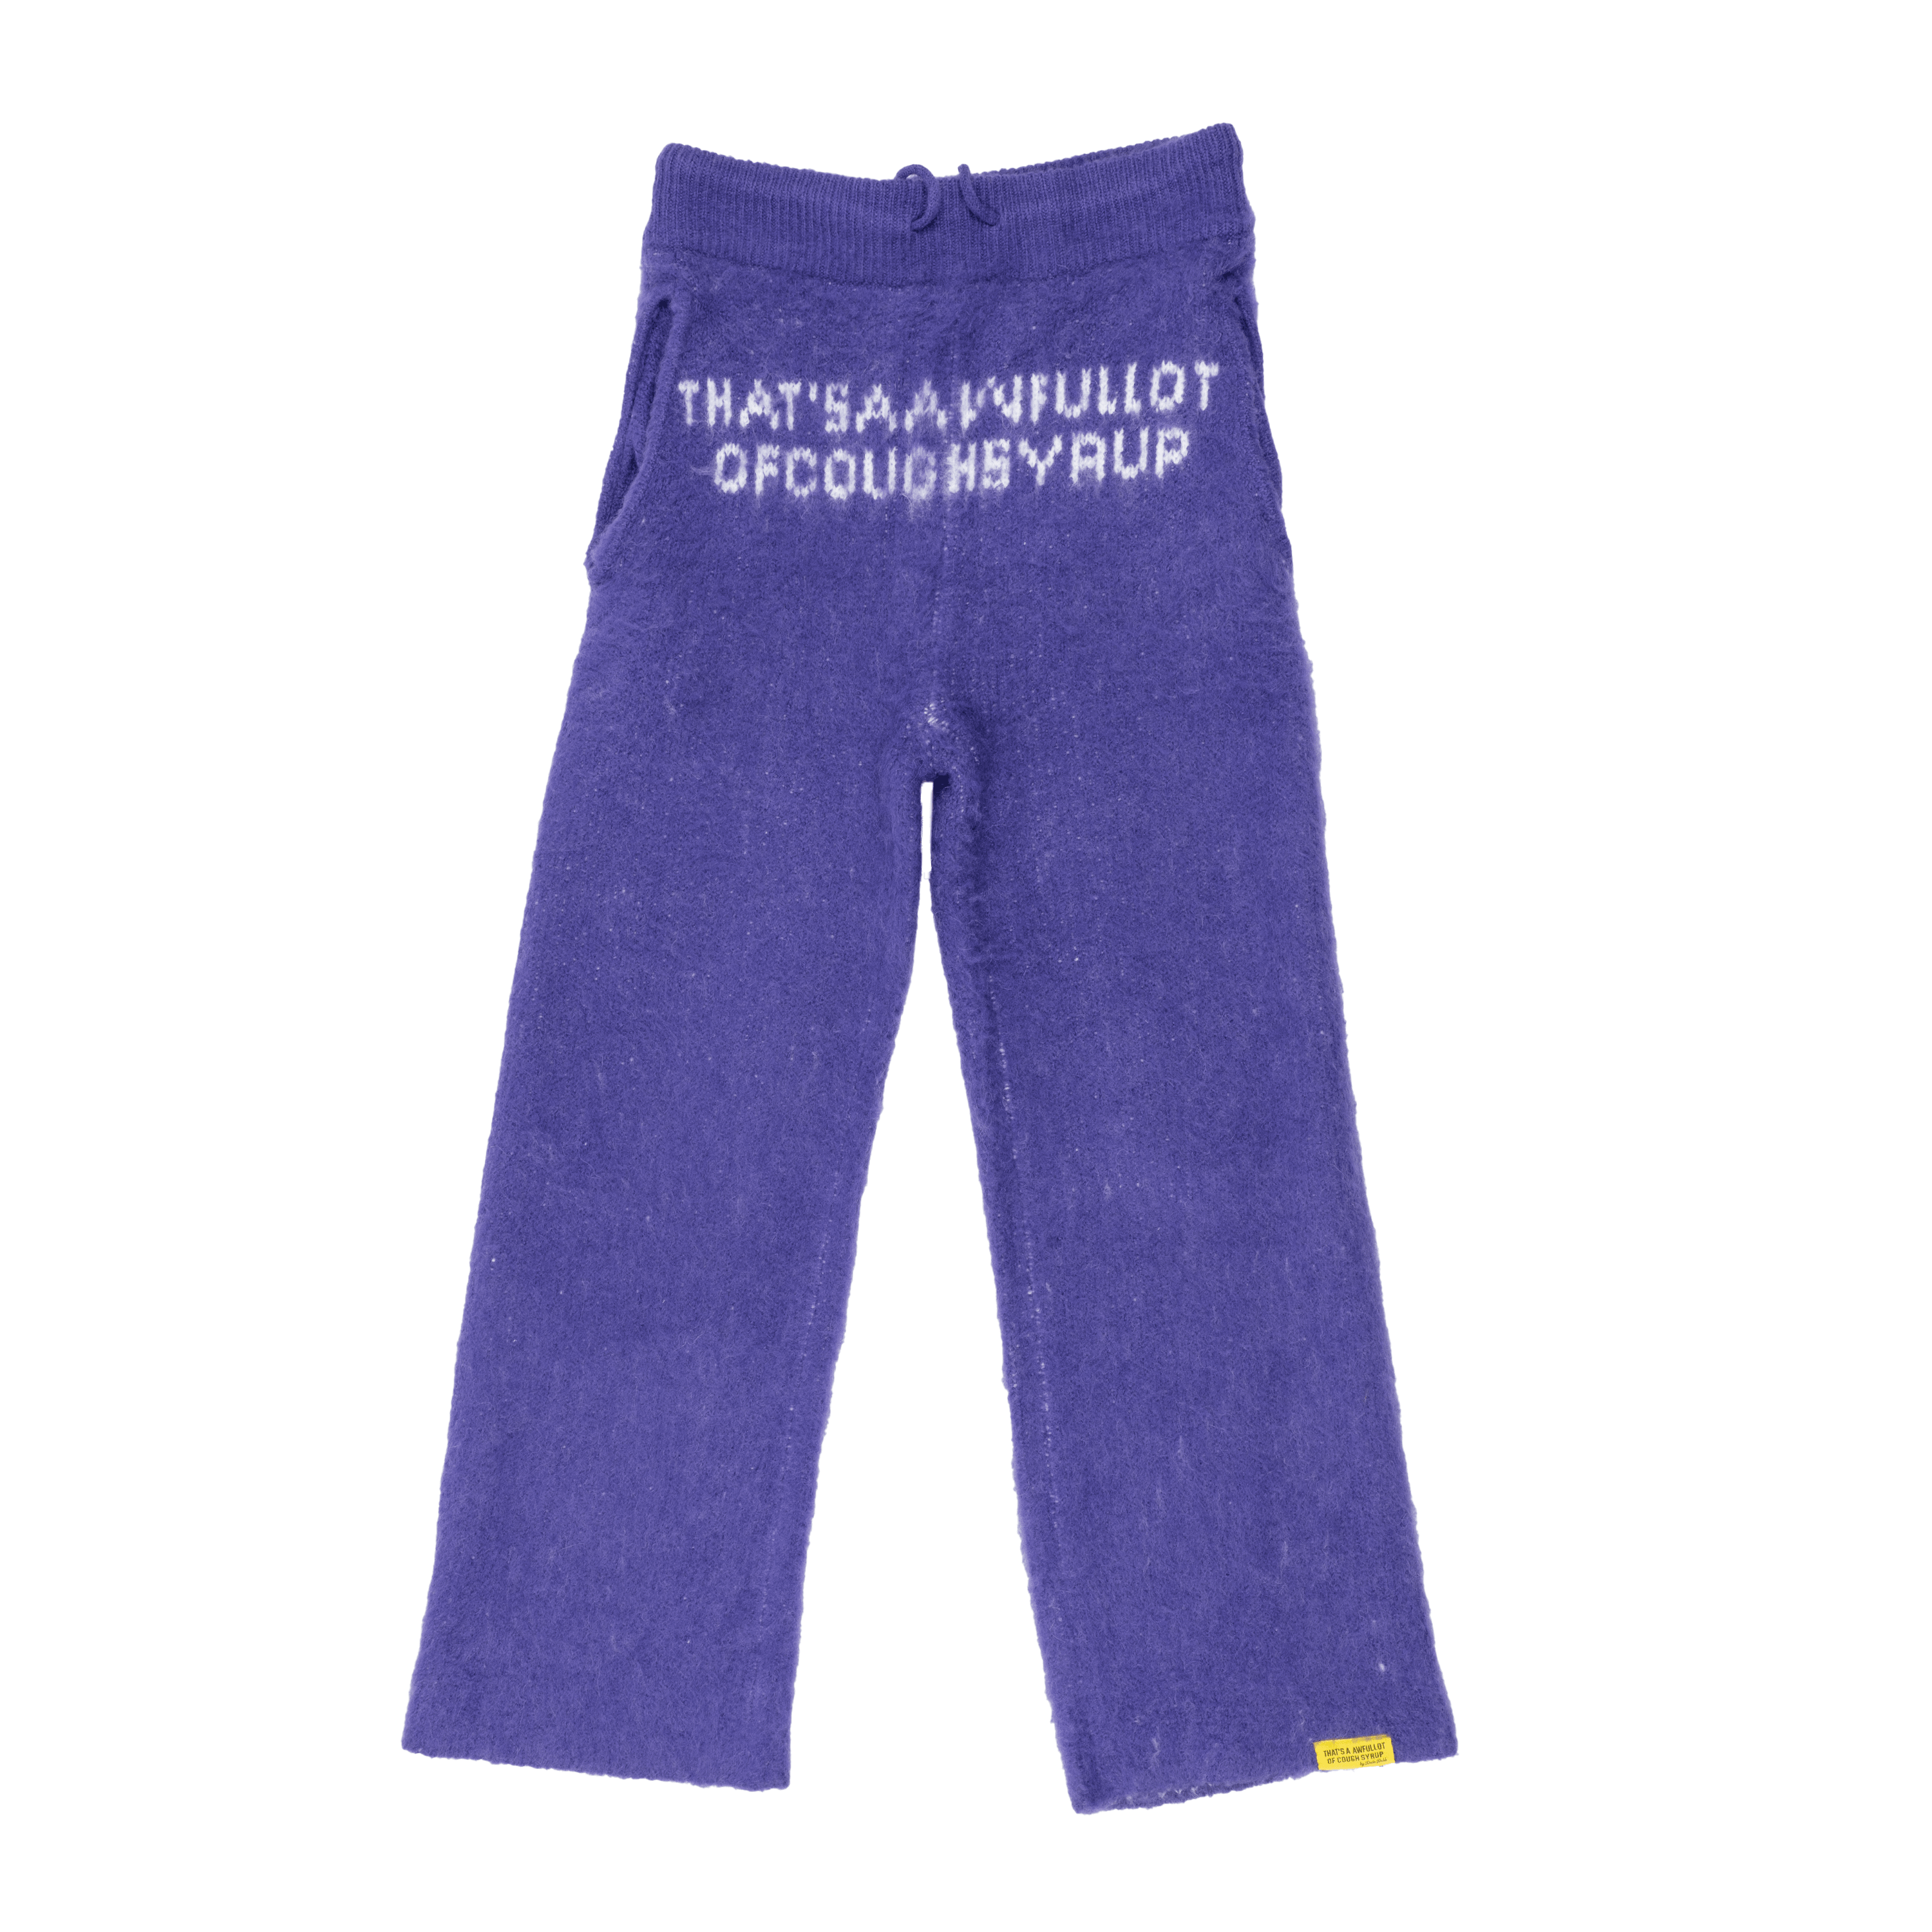 Purplemohairbottomsfront.png